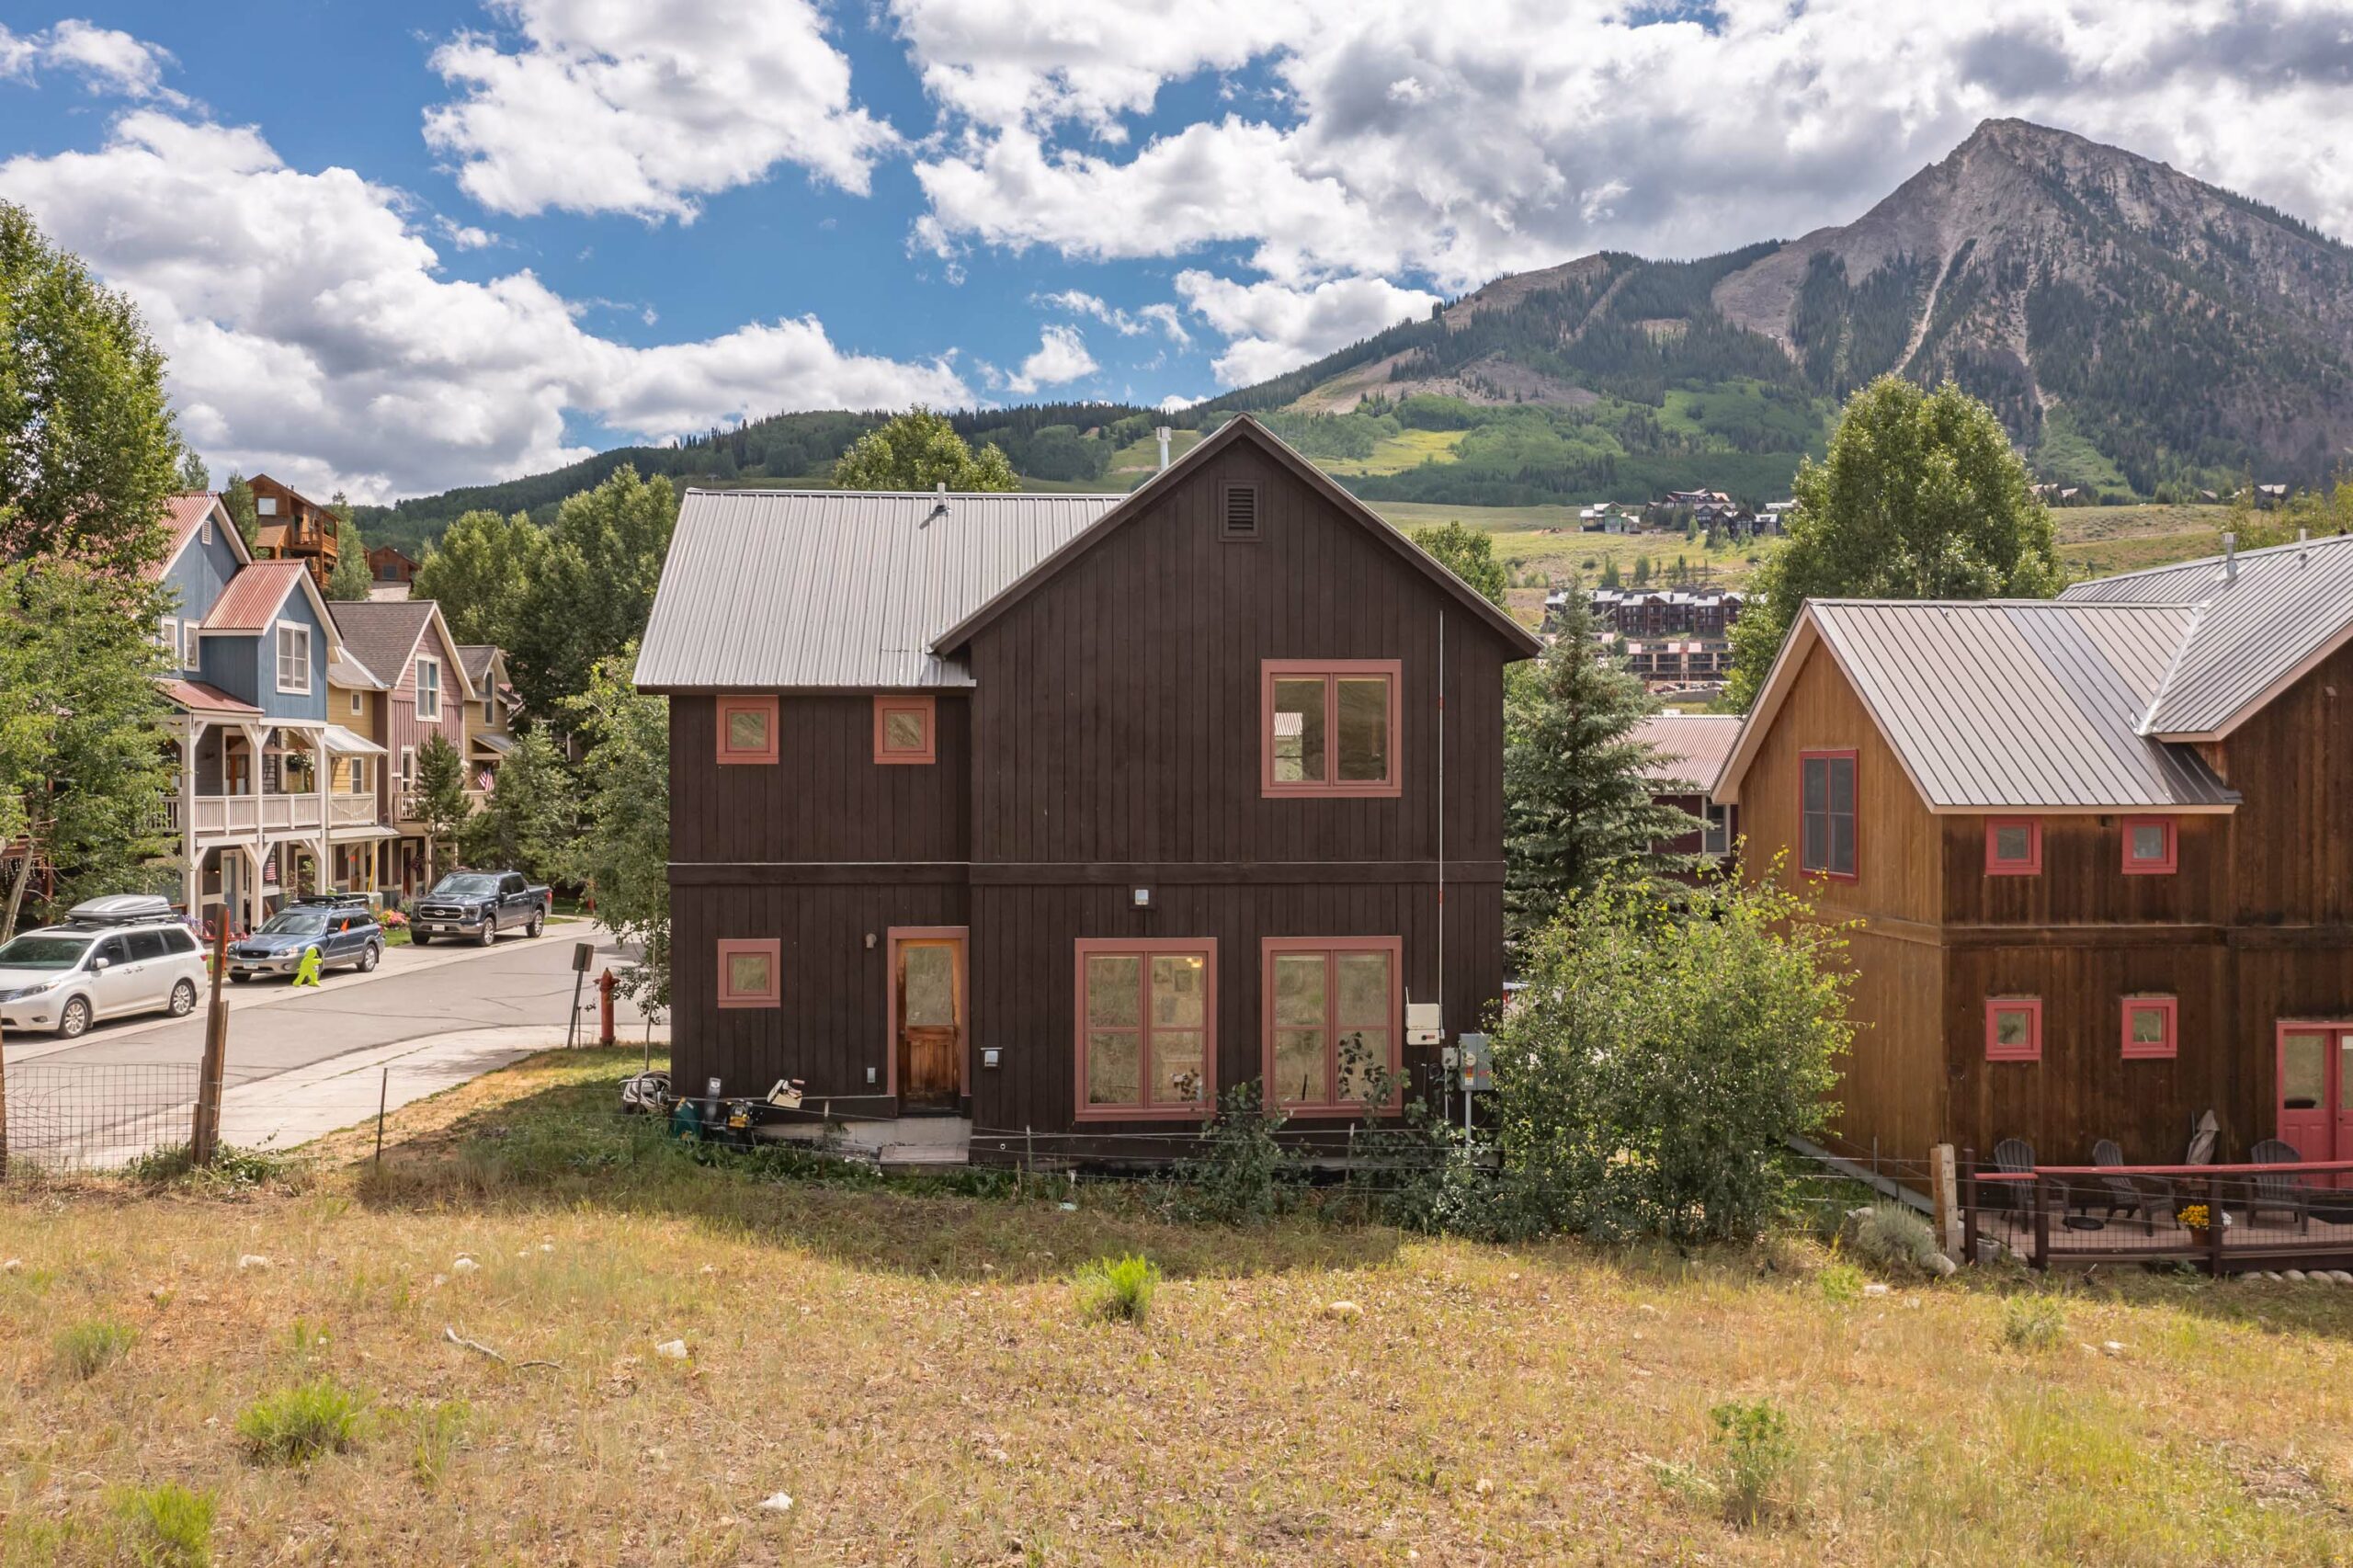 102 Horseshoe Drive Mt. Crested Butte, Colorado - back of property